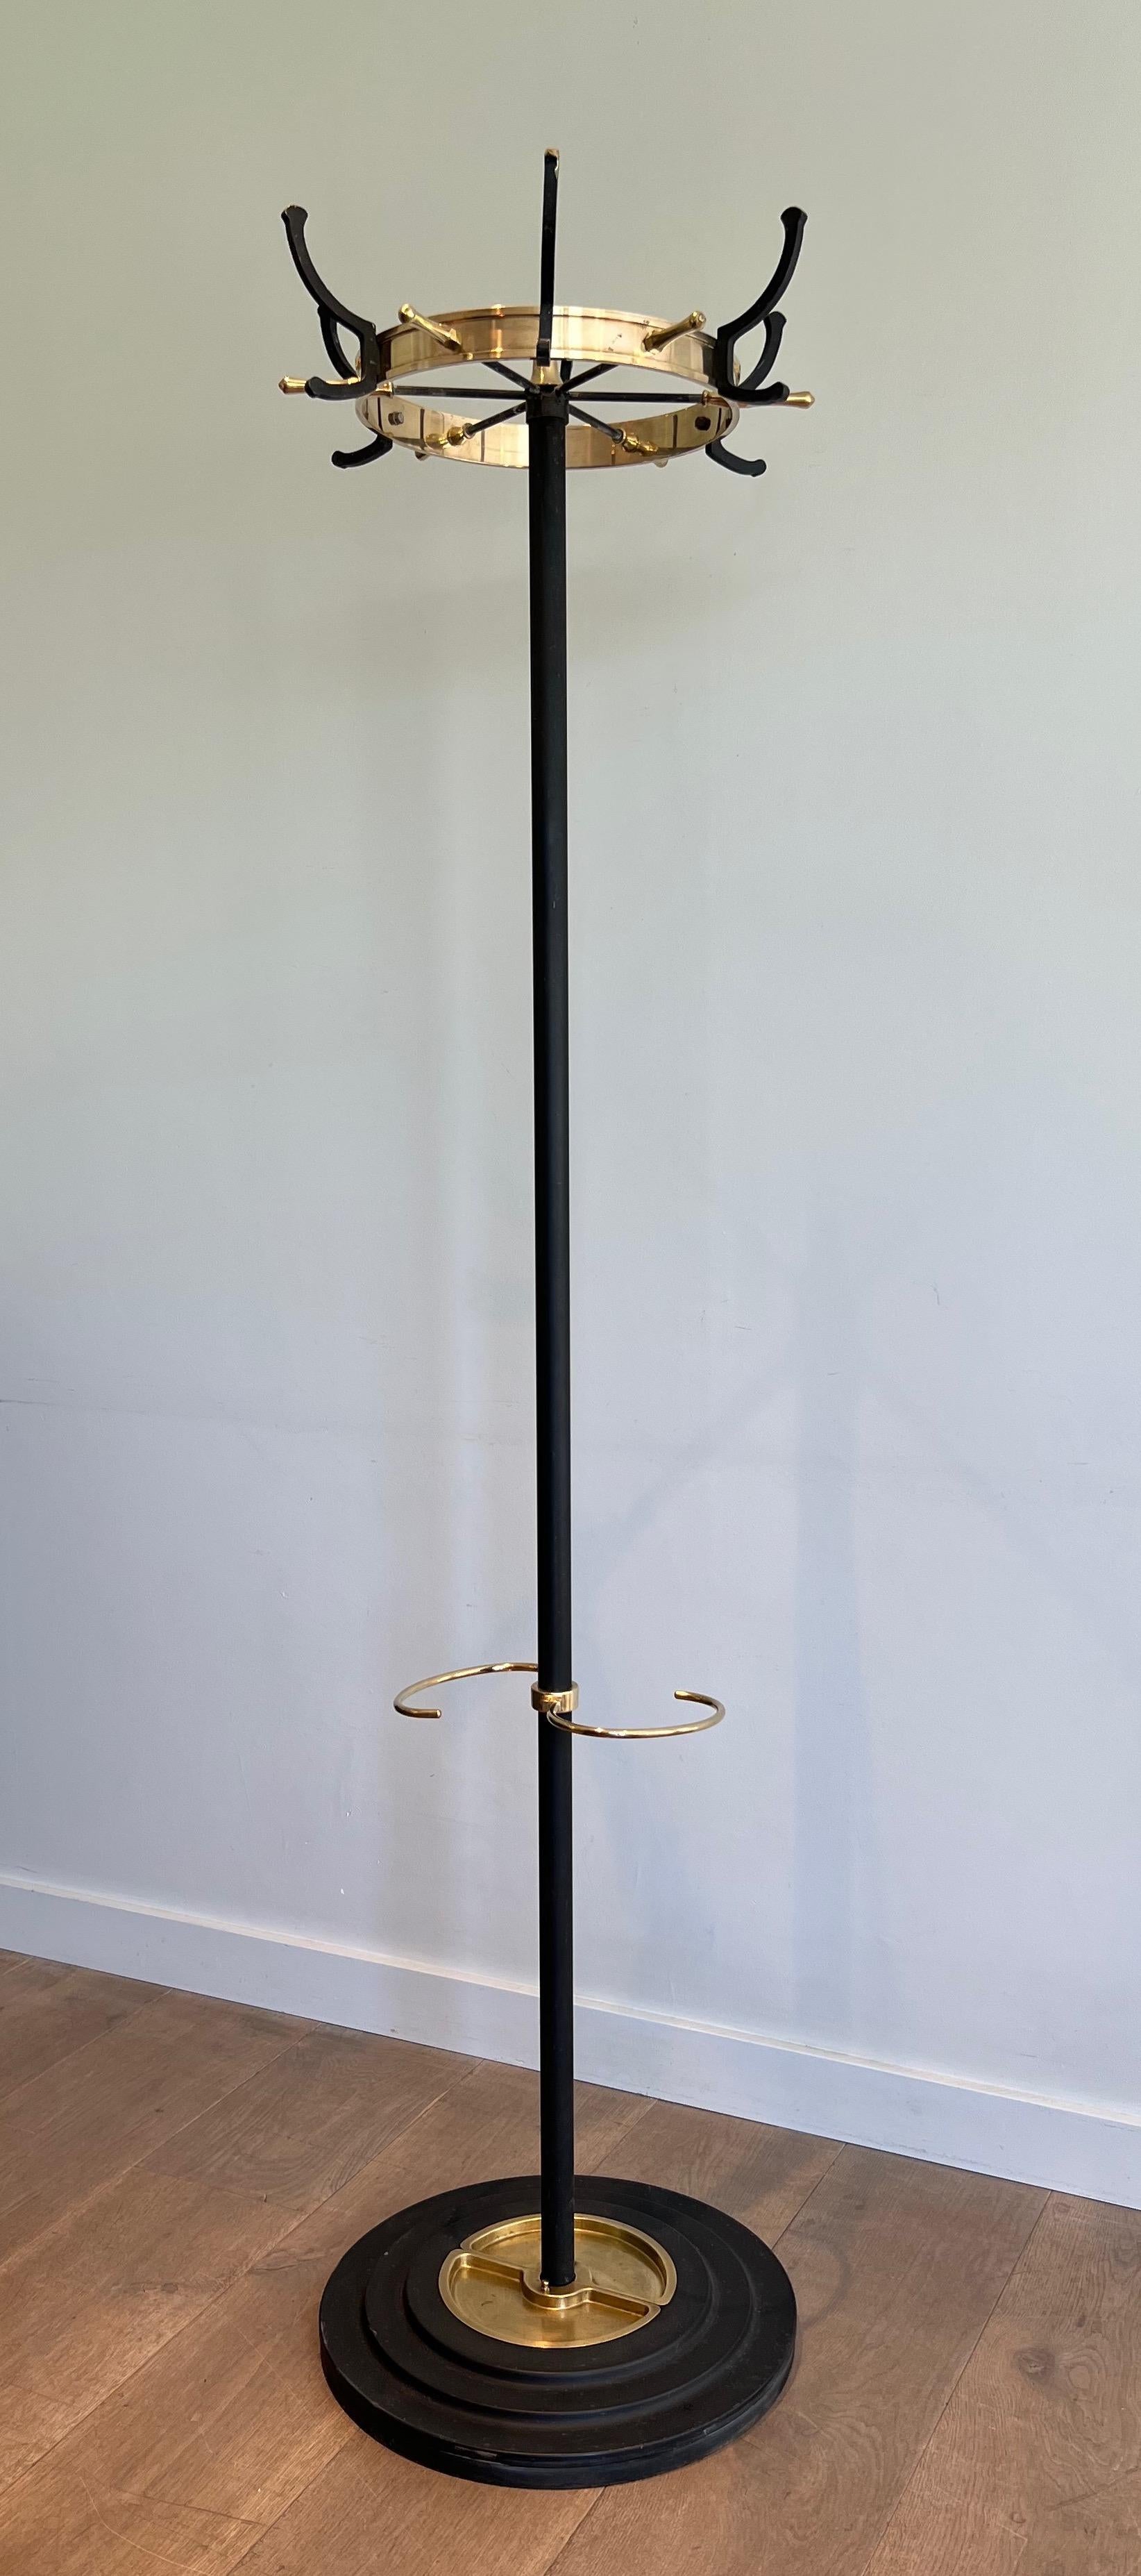 This very nice coat hanger is made of black lacquered metal and brass. There is an umbrella stand on the bottom part. This is a model by famous French designer Jacques Adnet. Circa 